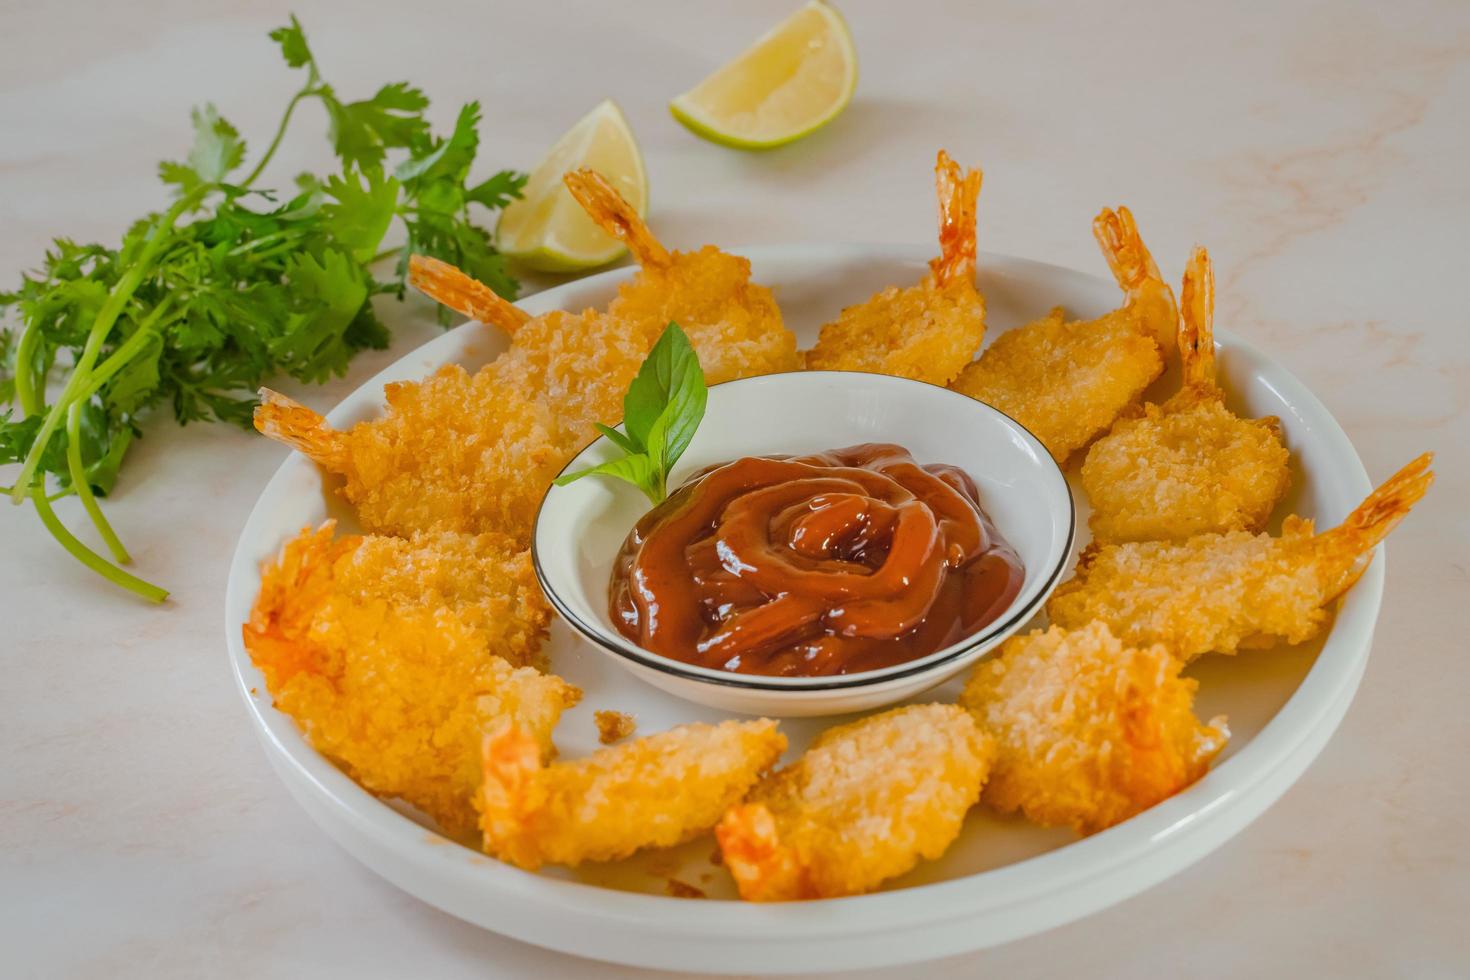 Lightly breaded then fried this Classic Fried Shrimp recipe is ...